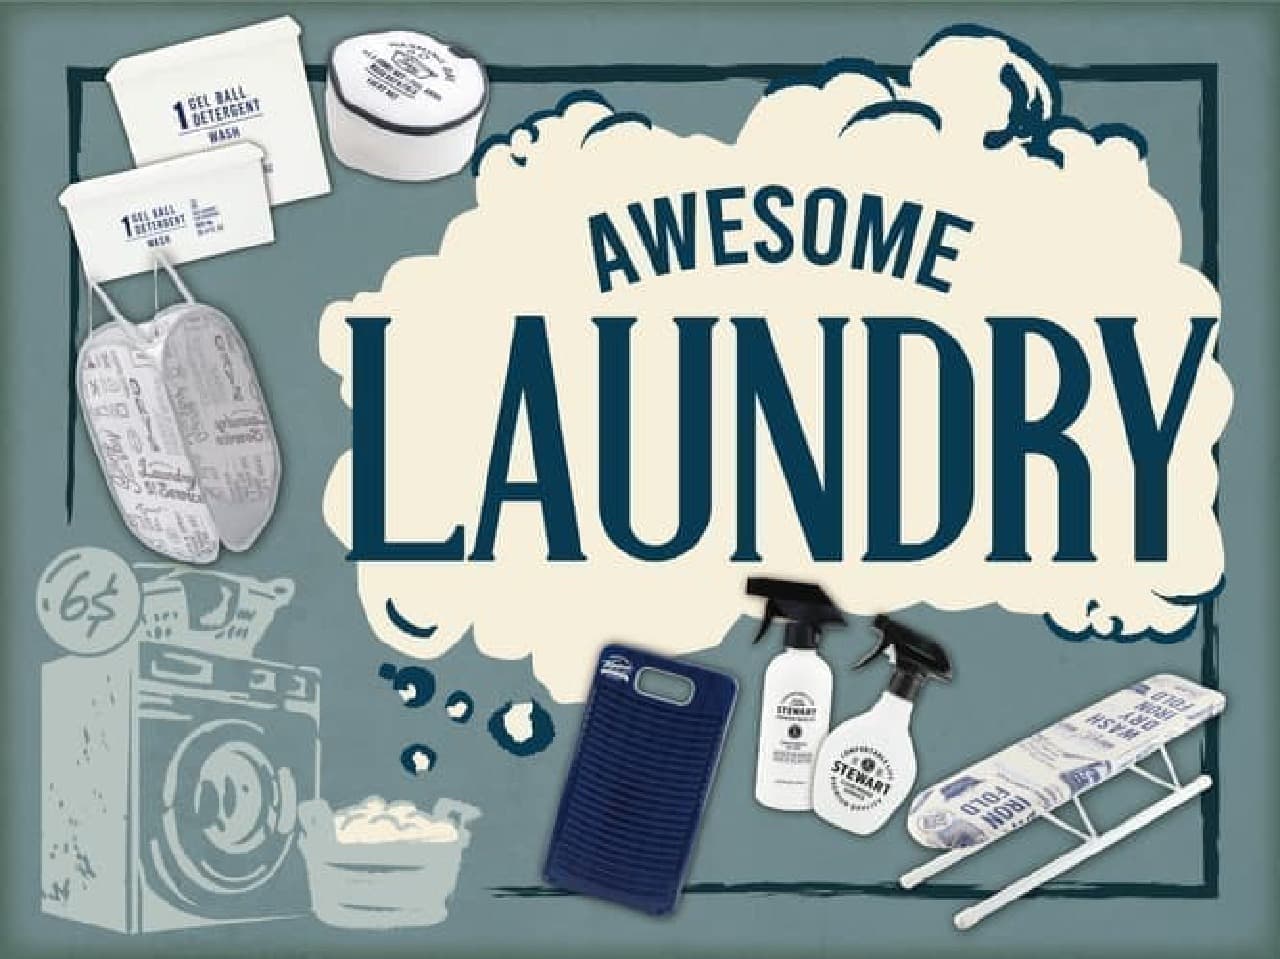 Awesome store "Laundry goods to enjoy"